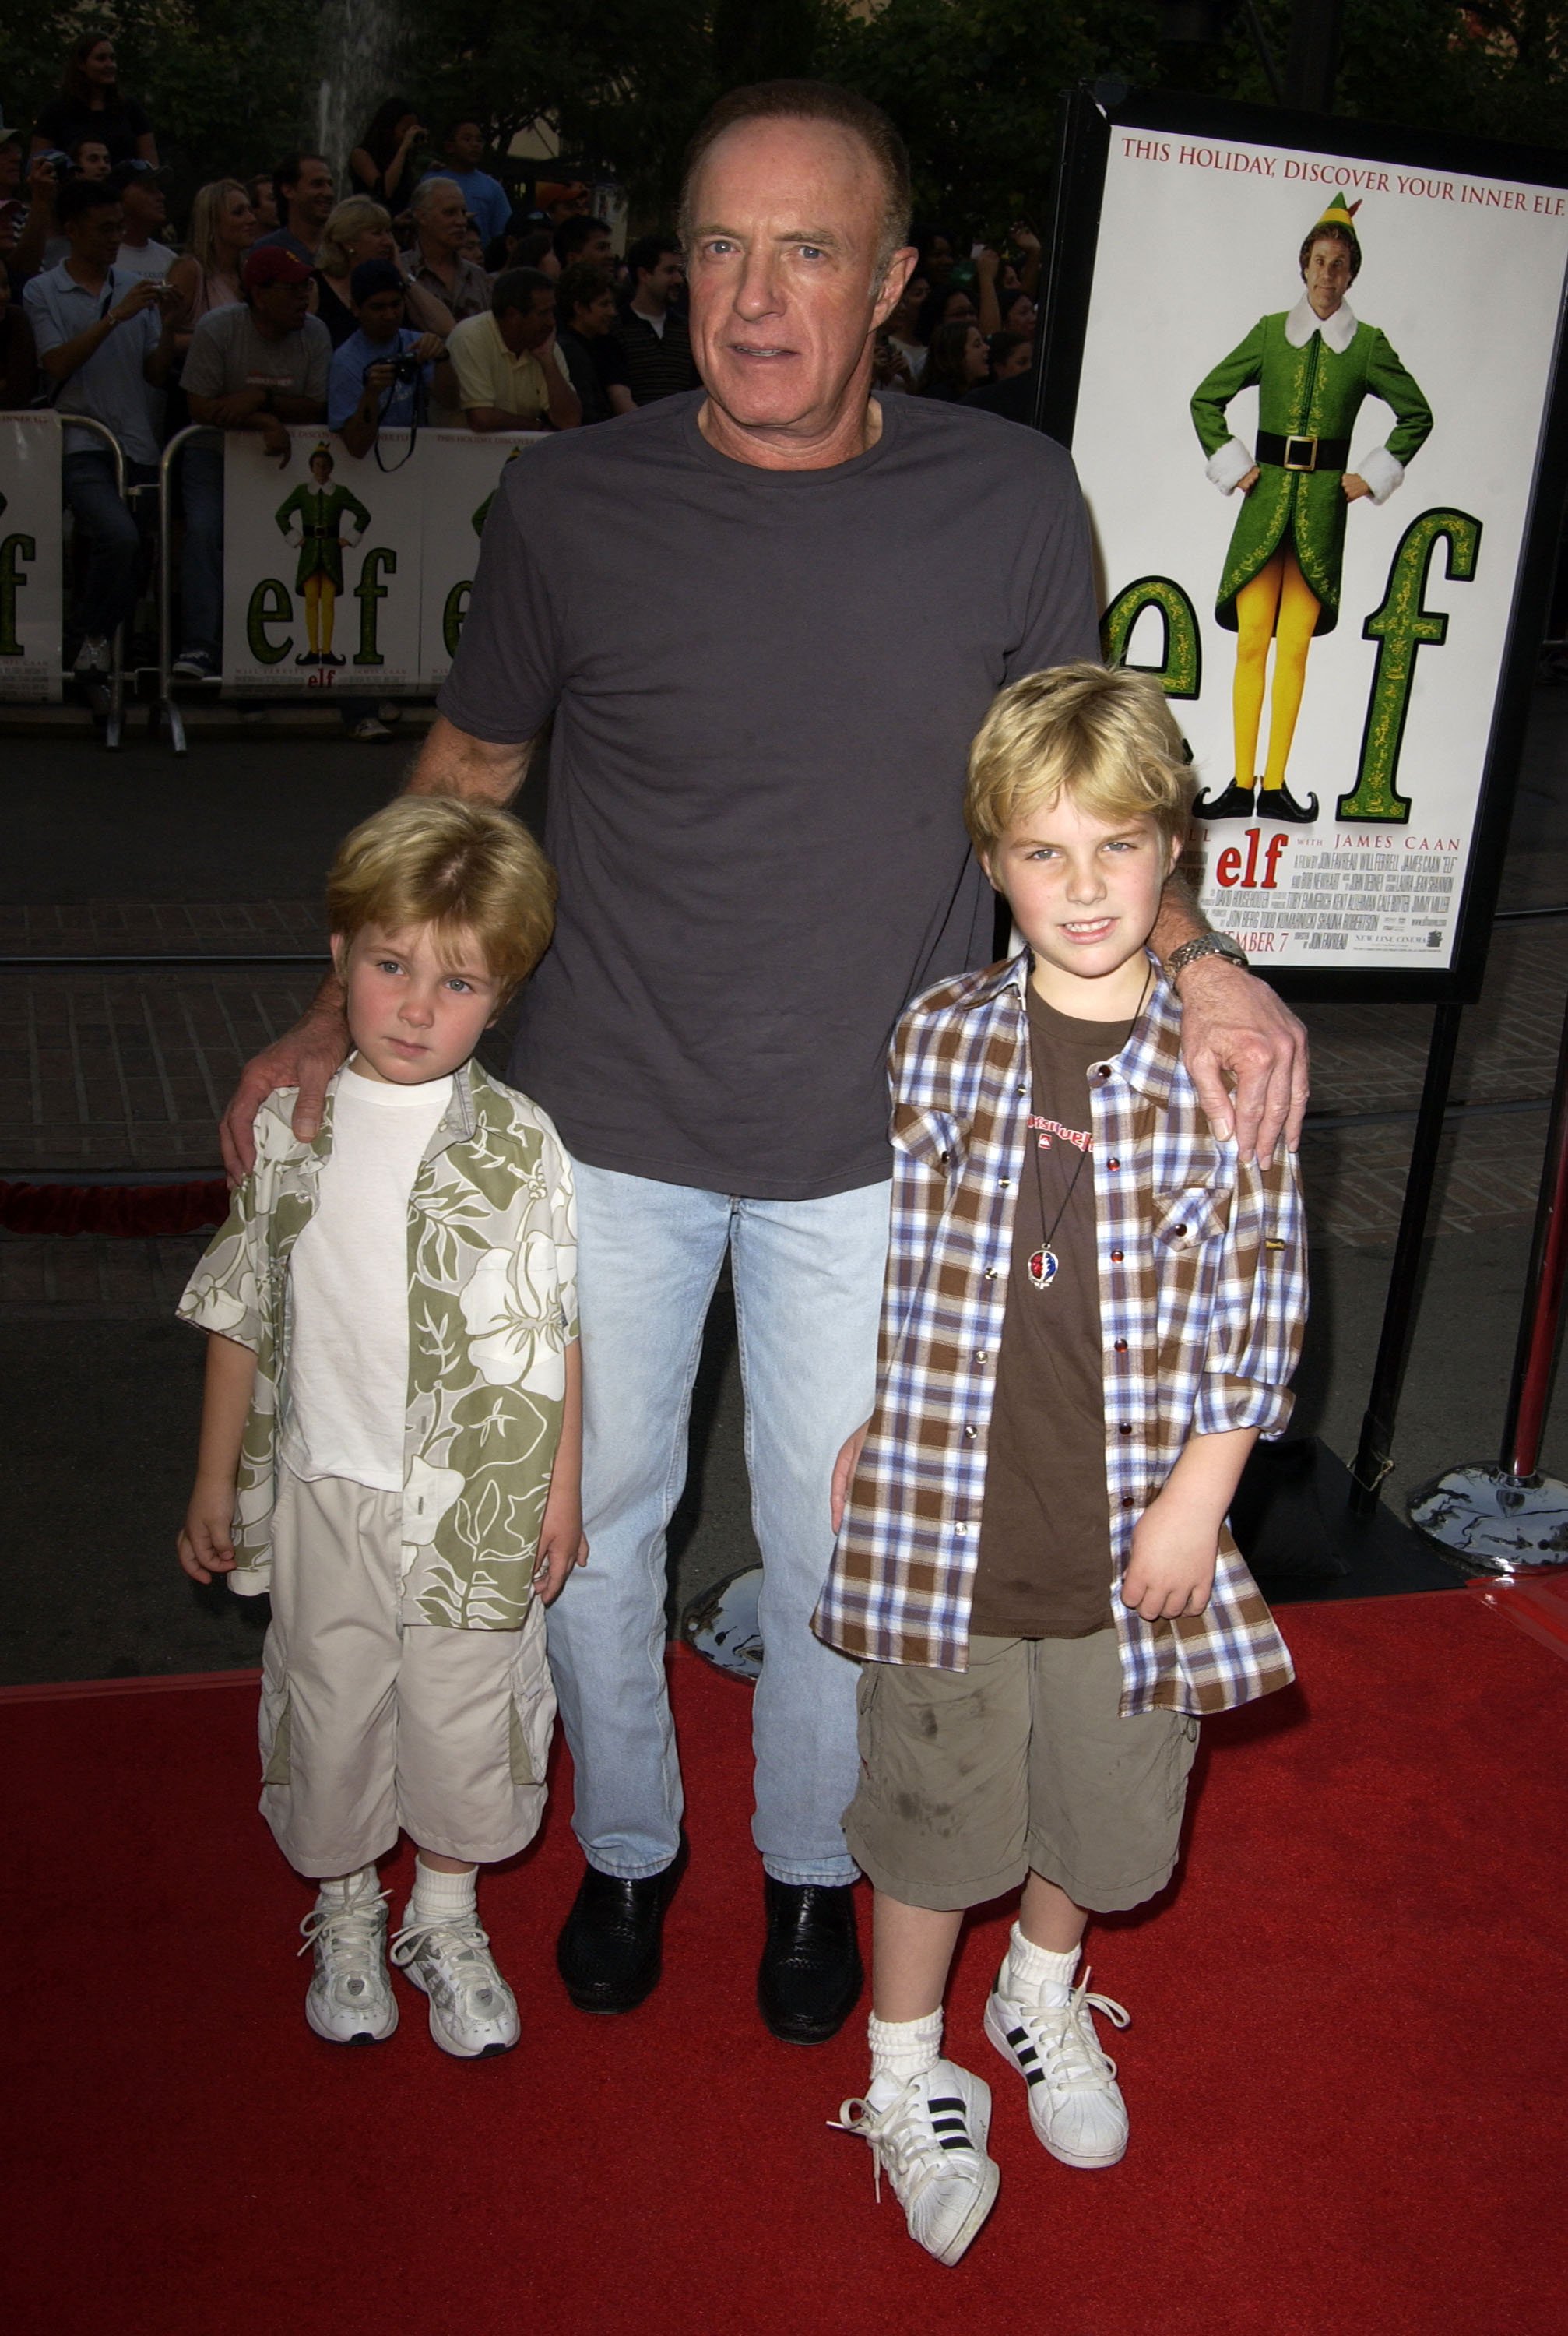 James, Jimmy, and Jake Caan at the "Elf" Special Screening in Los Angeles, California, on October 26, 2003. | Source: Getty Images